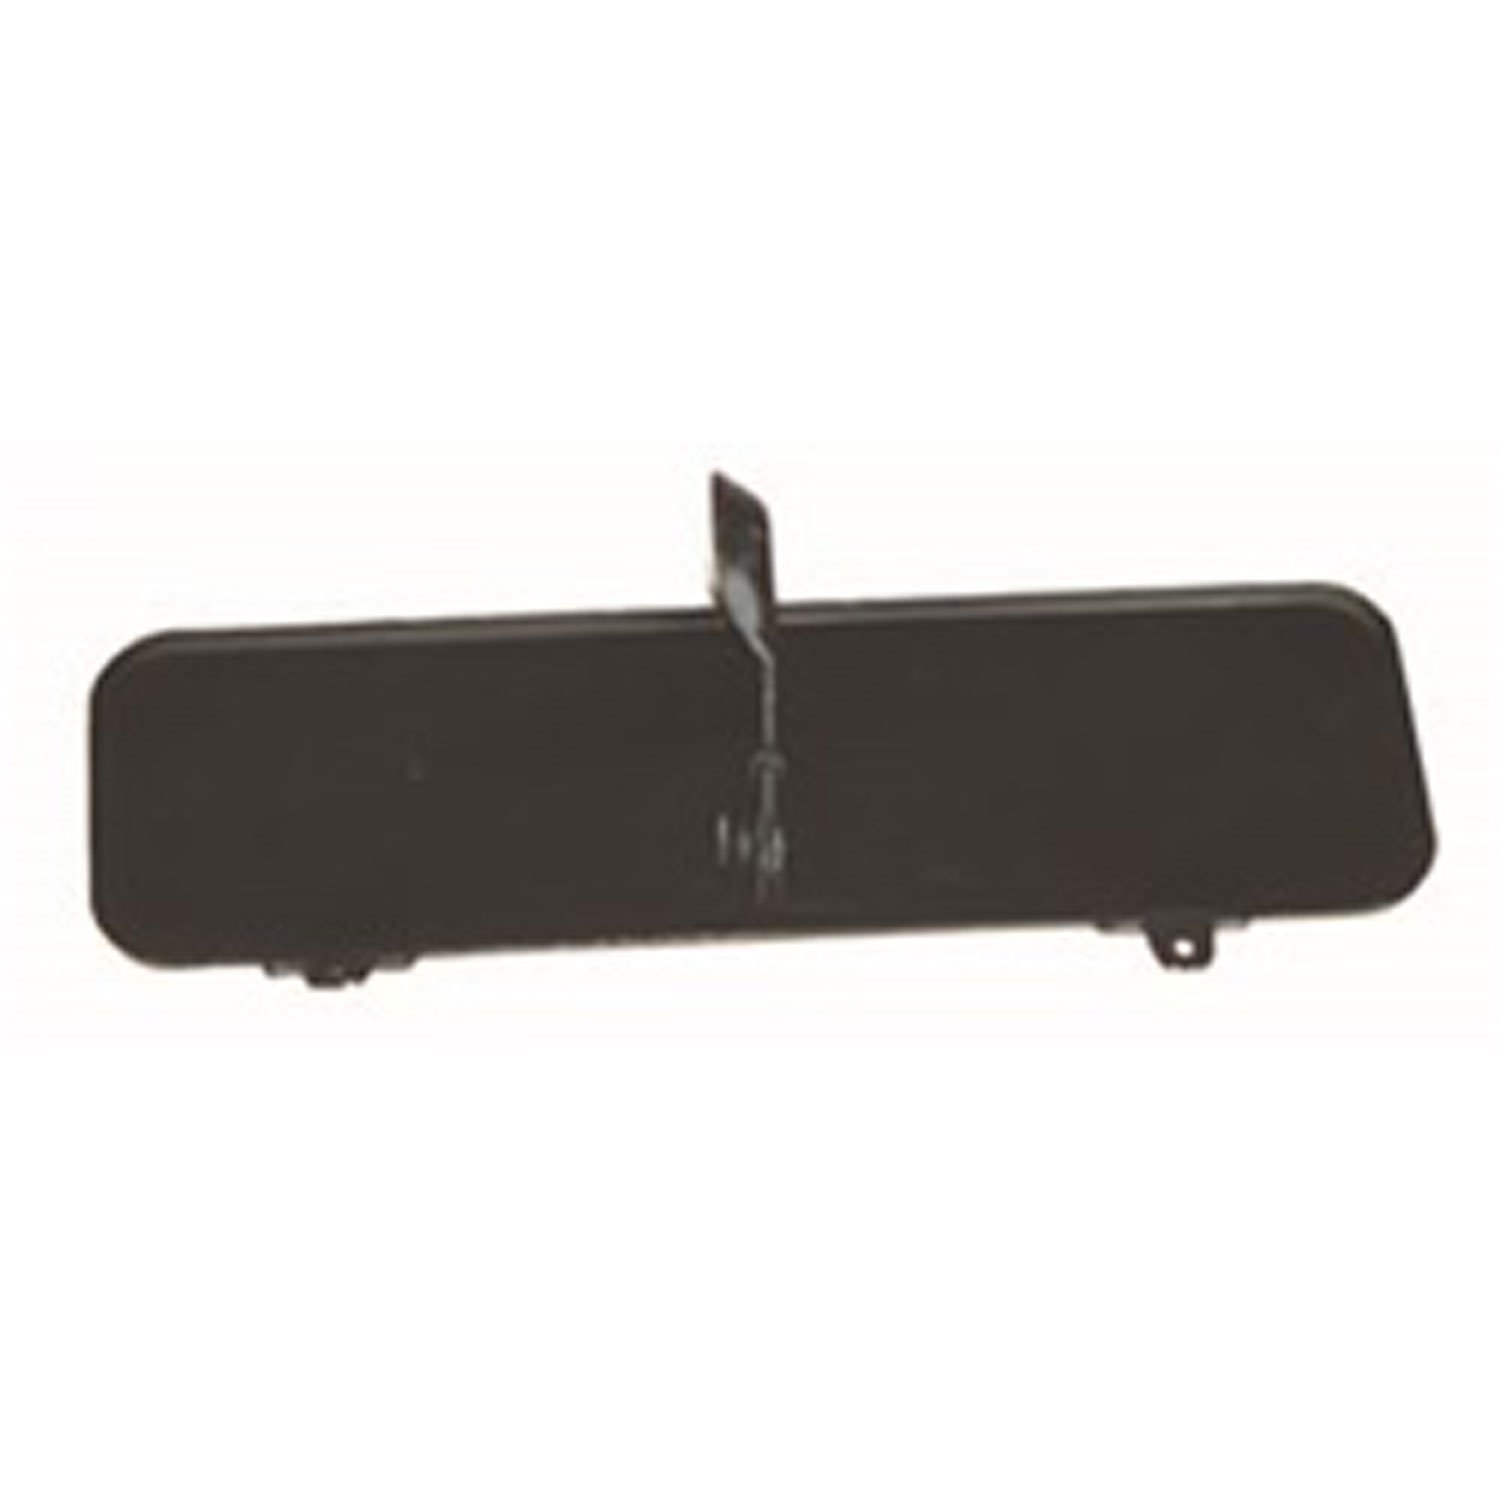 This windshield ventilation cover kit from Omix-ADA includes